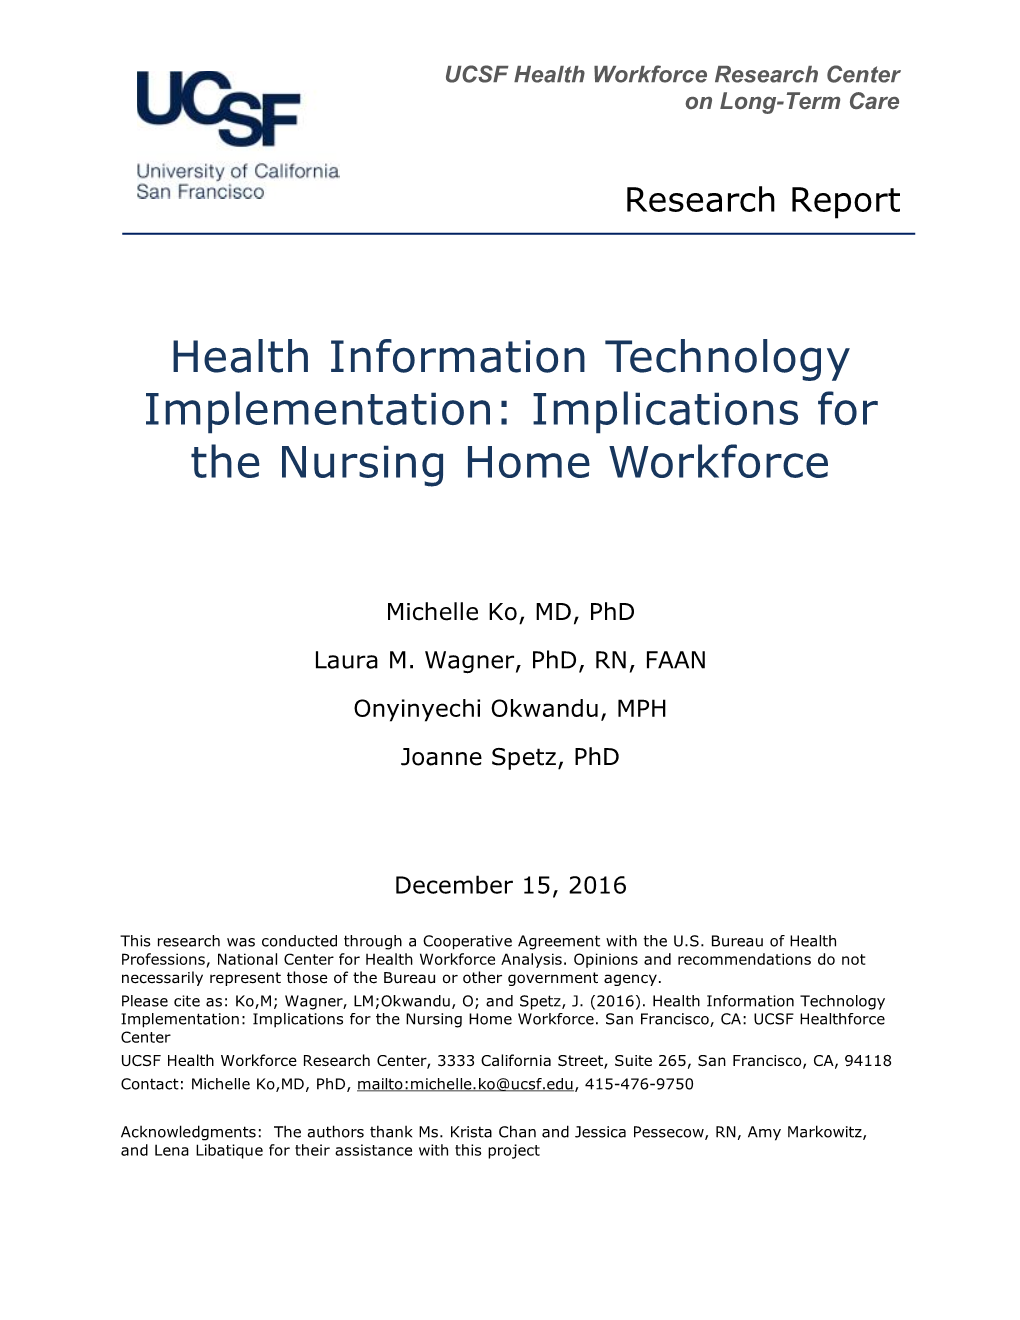 Health Information Technology Implementation: Implications for the Nursing Home Workforce